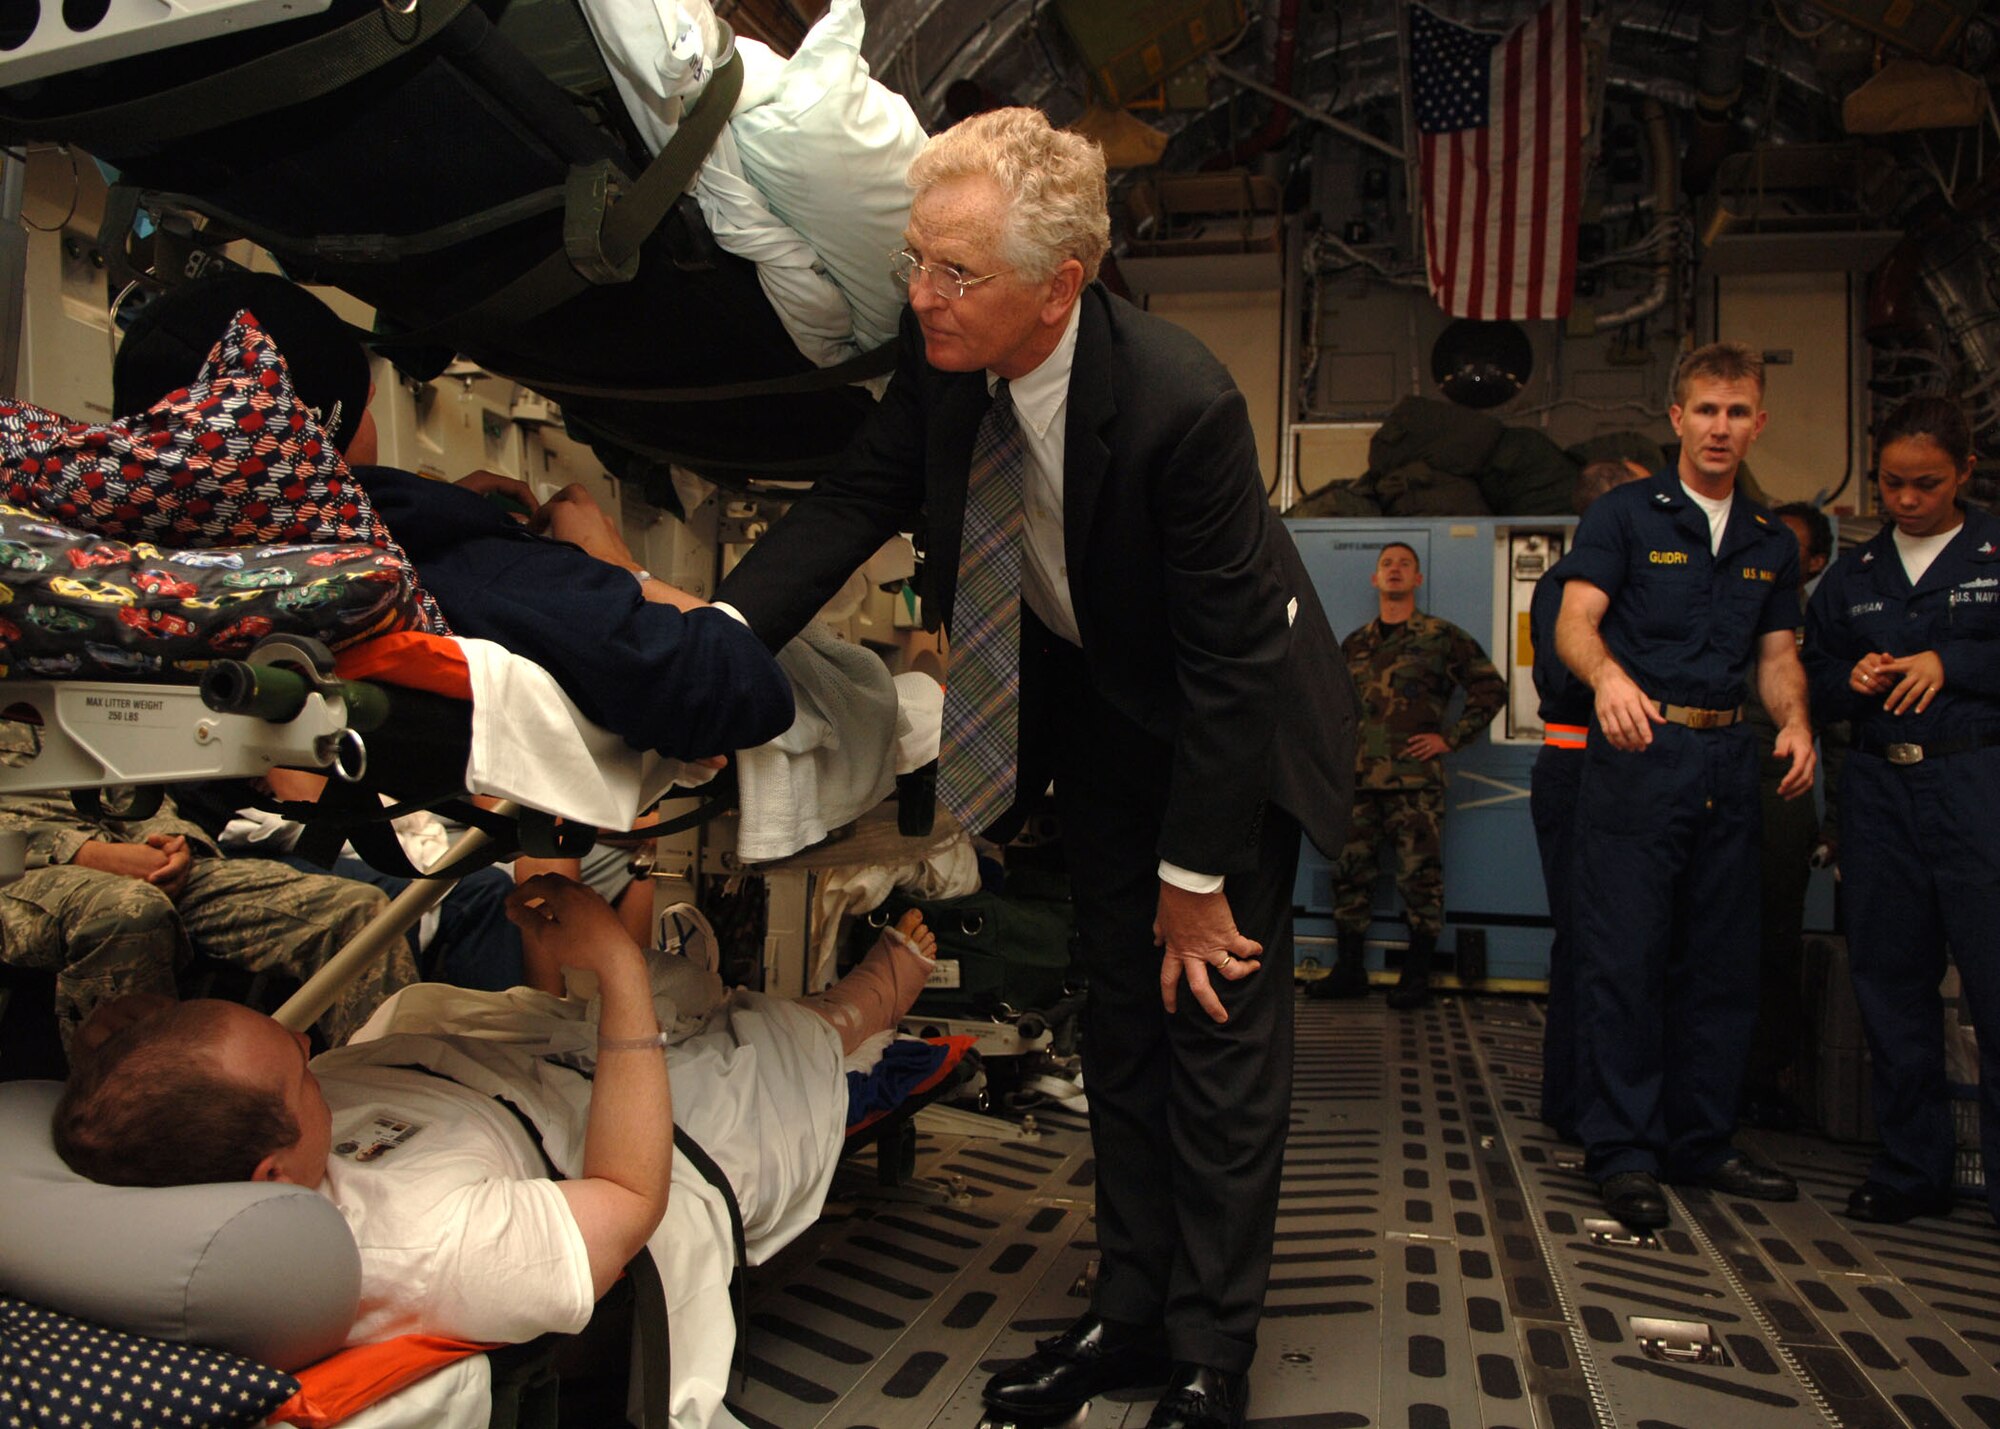 Dr. Samuel W. Casscells, Assistant Secretary for Health Affairs, talks to wounded soldiers returning from overseas as they remain strapped down on litters to prevent any further injuries during transport.